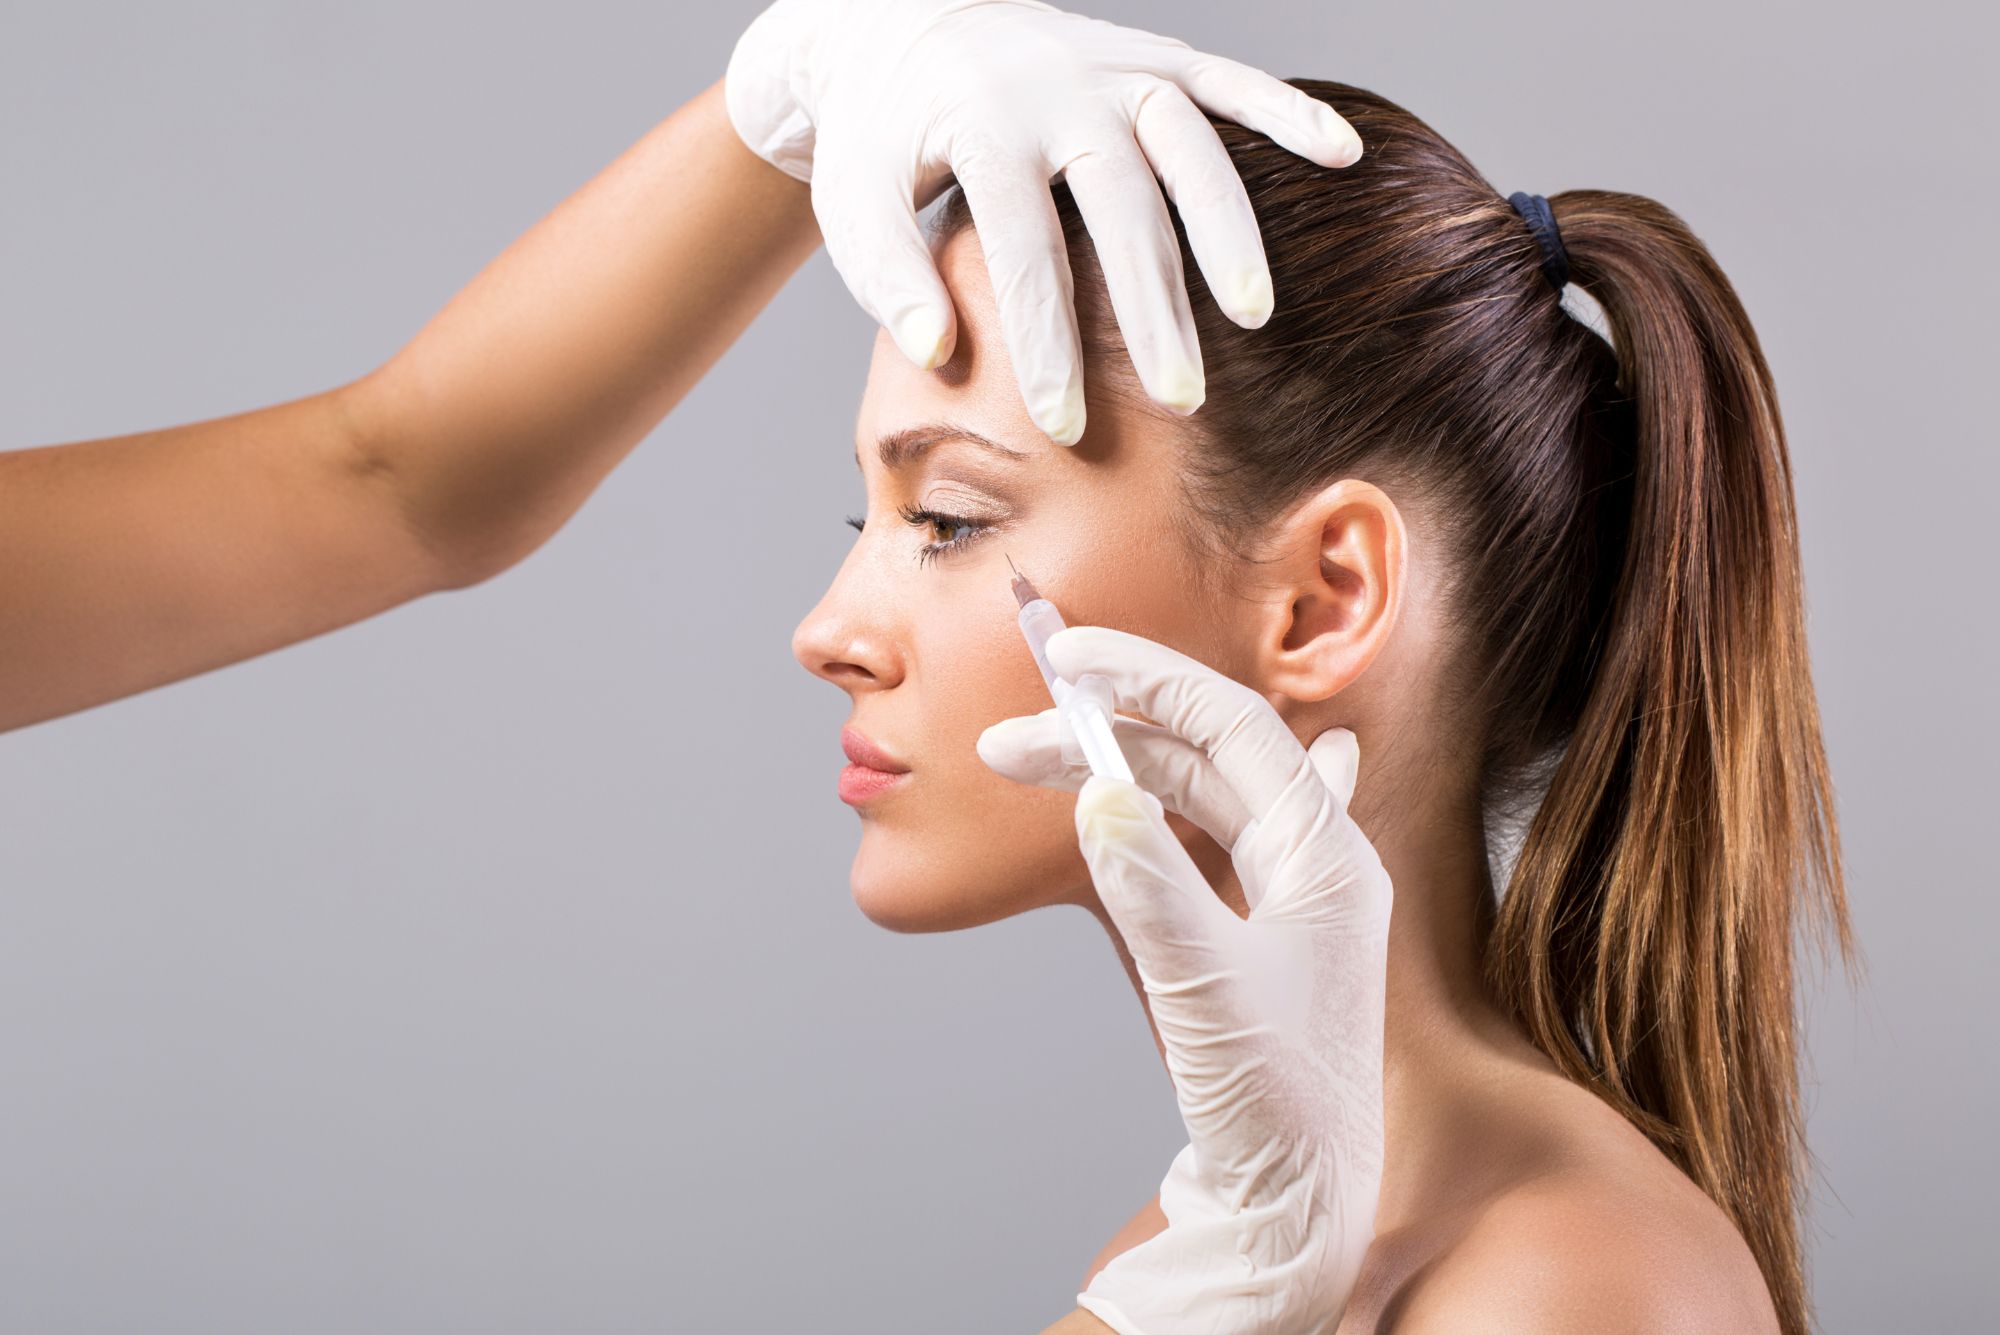 After discussing Dysport vs. Botox with her doctor, a woman decides to get Botox injections to mask her fine lines.